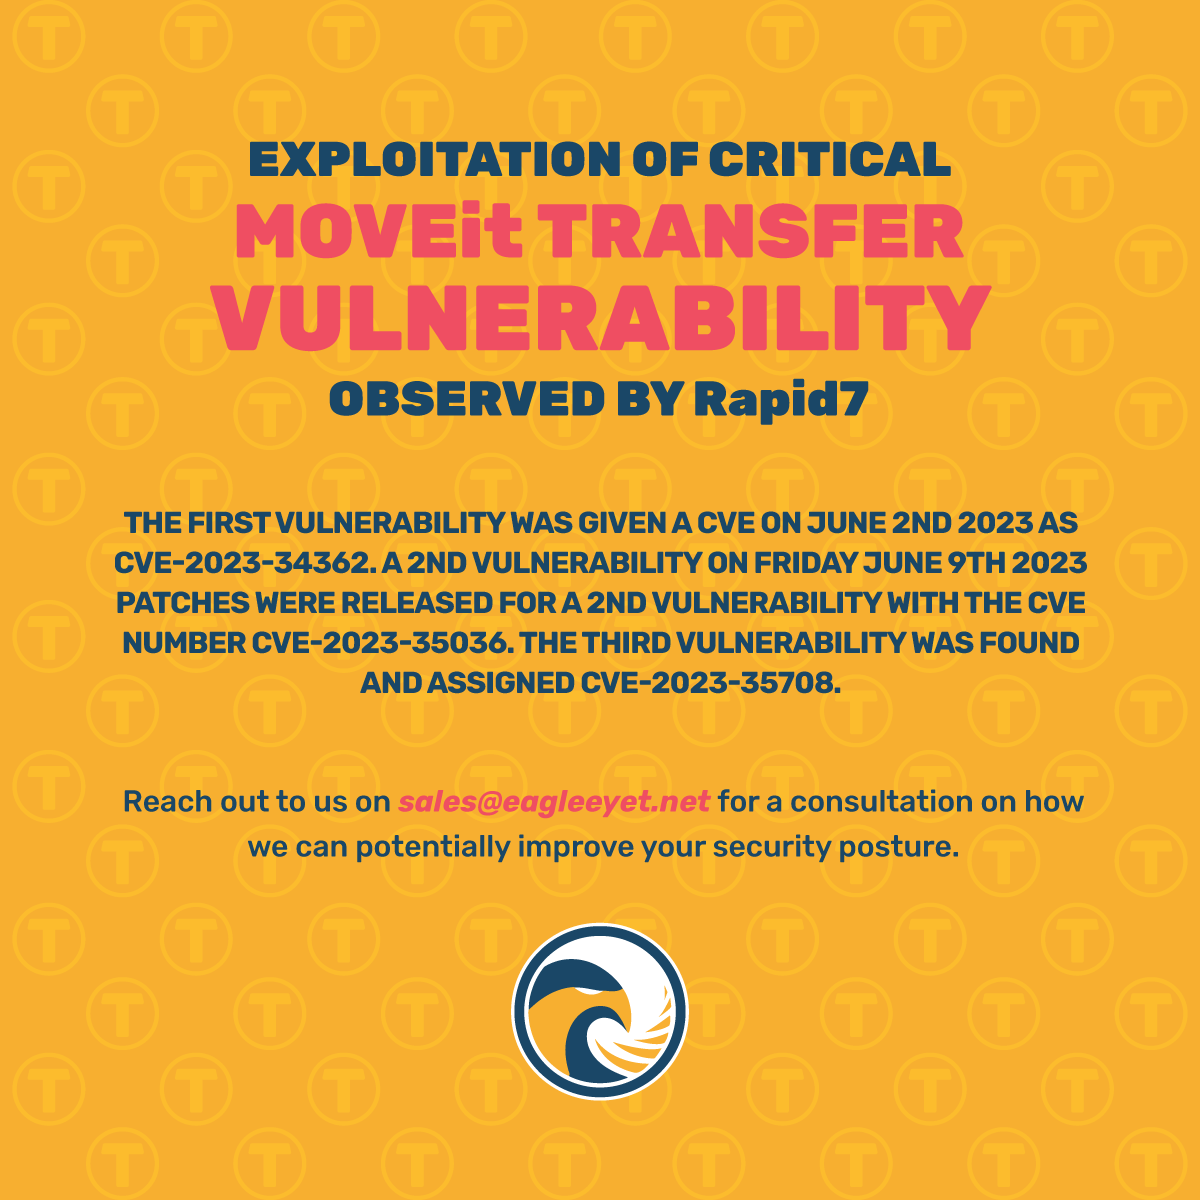 Exploitation of Critical MOVEit Transfer Vulnerability Observed By Rapid7